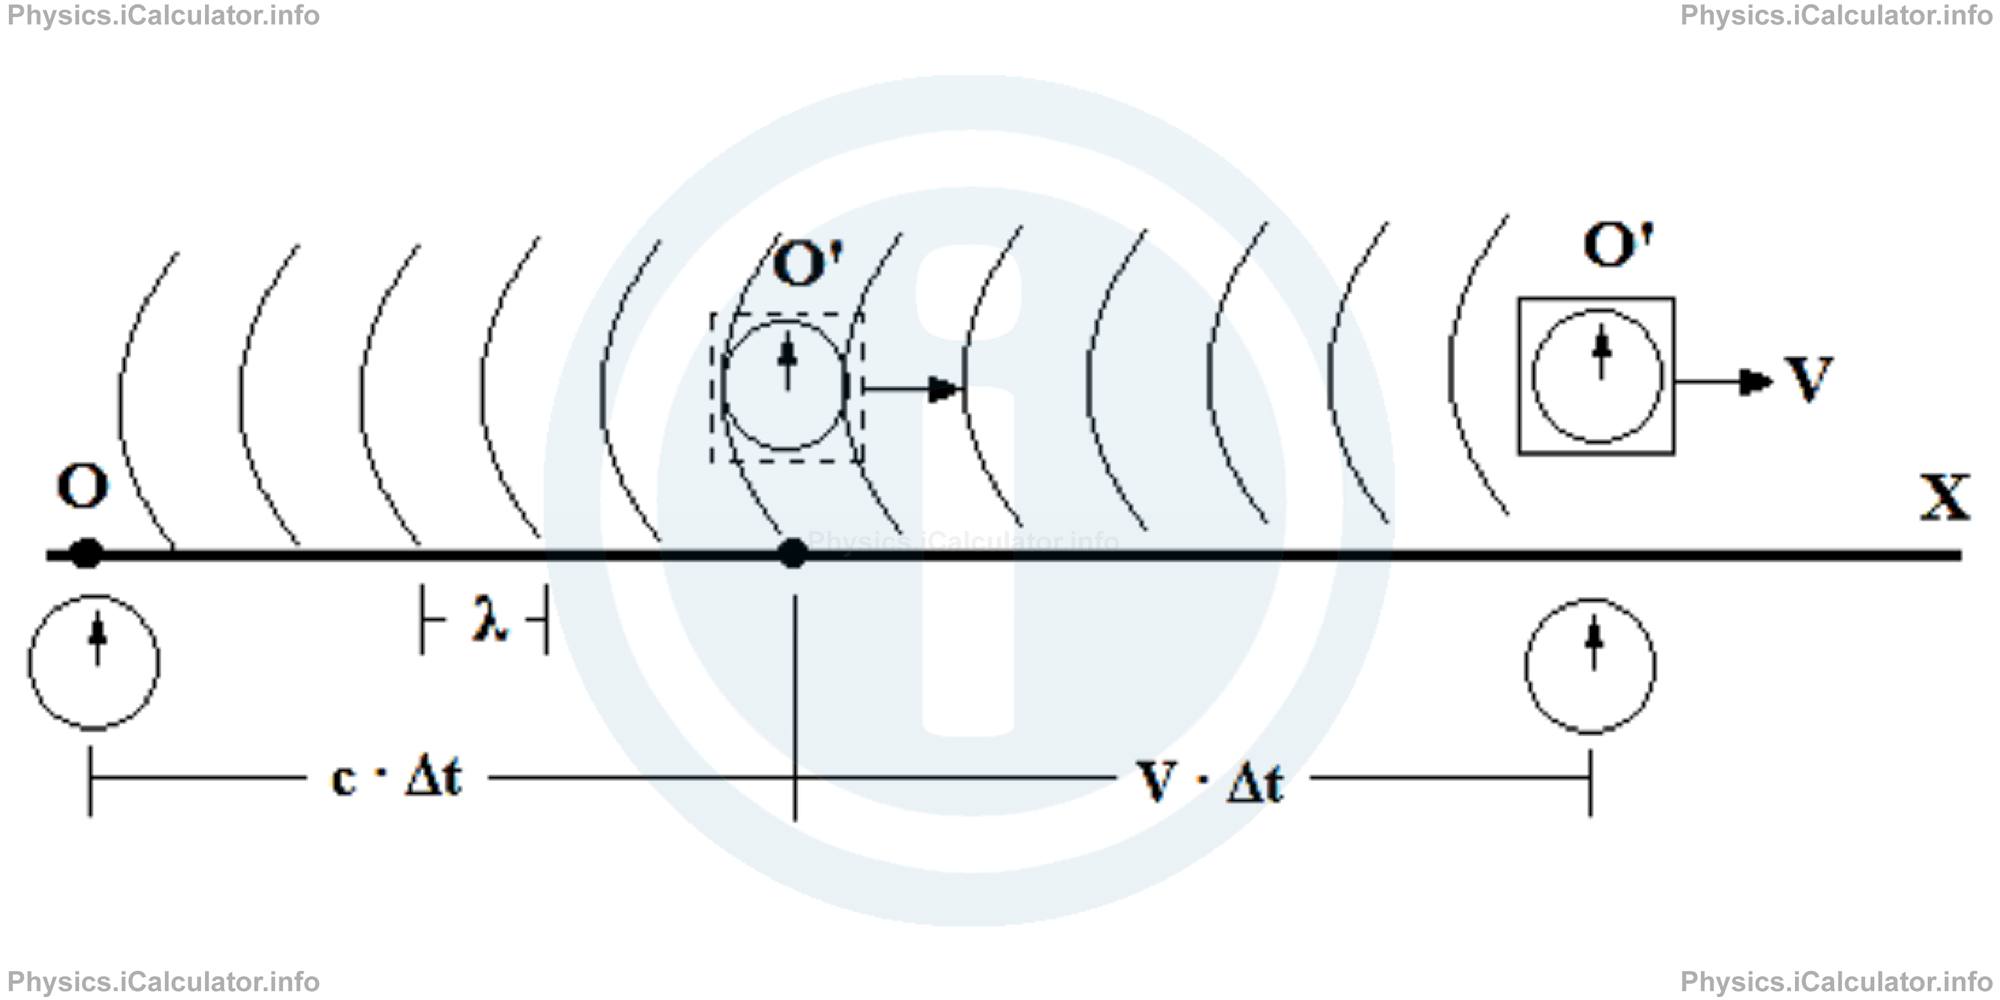 Physics Tutorials: This image provides visual information for the physics tutorial Relativistic Transformation of Velocity and the Relativistic Doppler Effect 